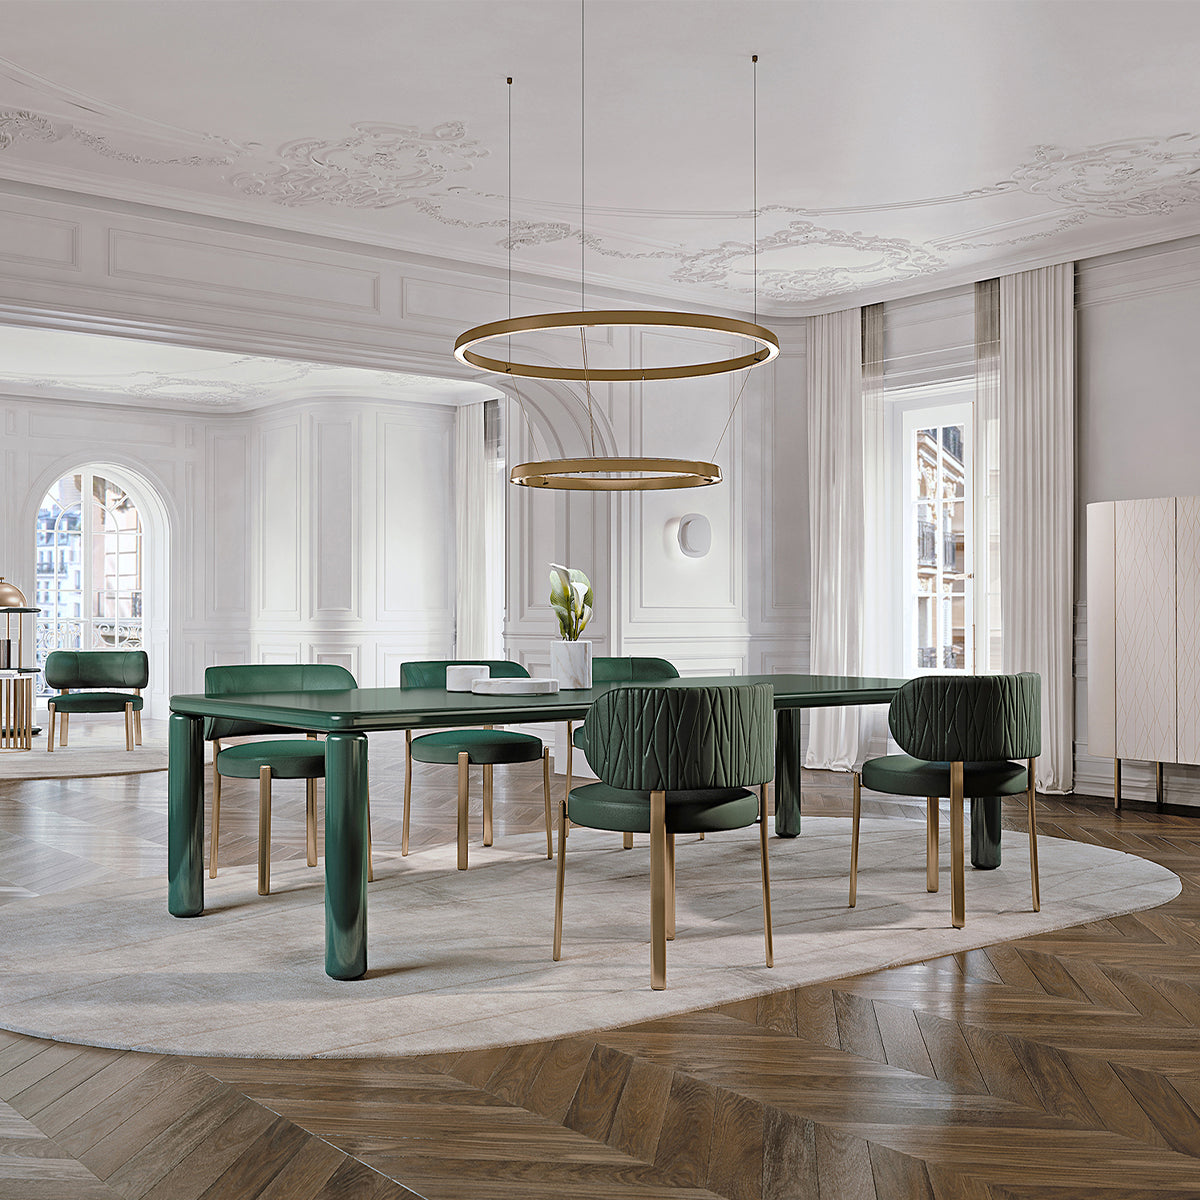 roma-lacquered-table-turri-dining-gallery-02